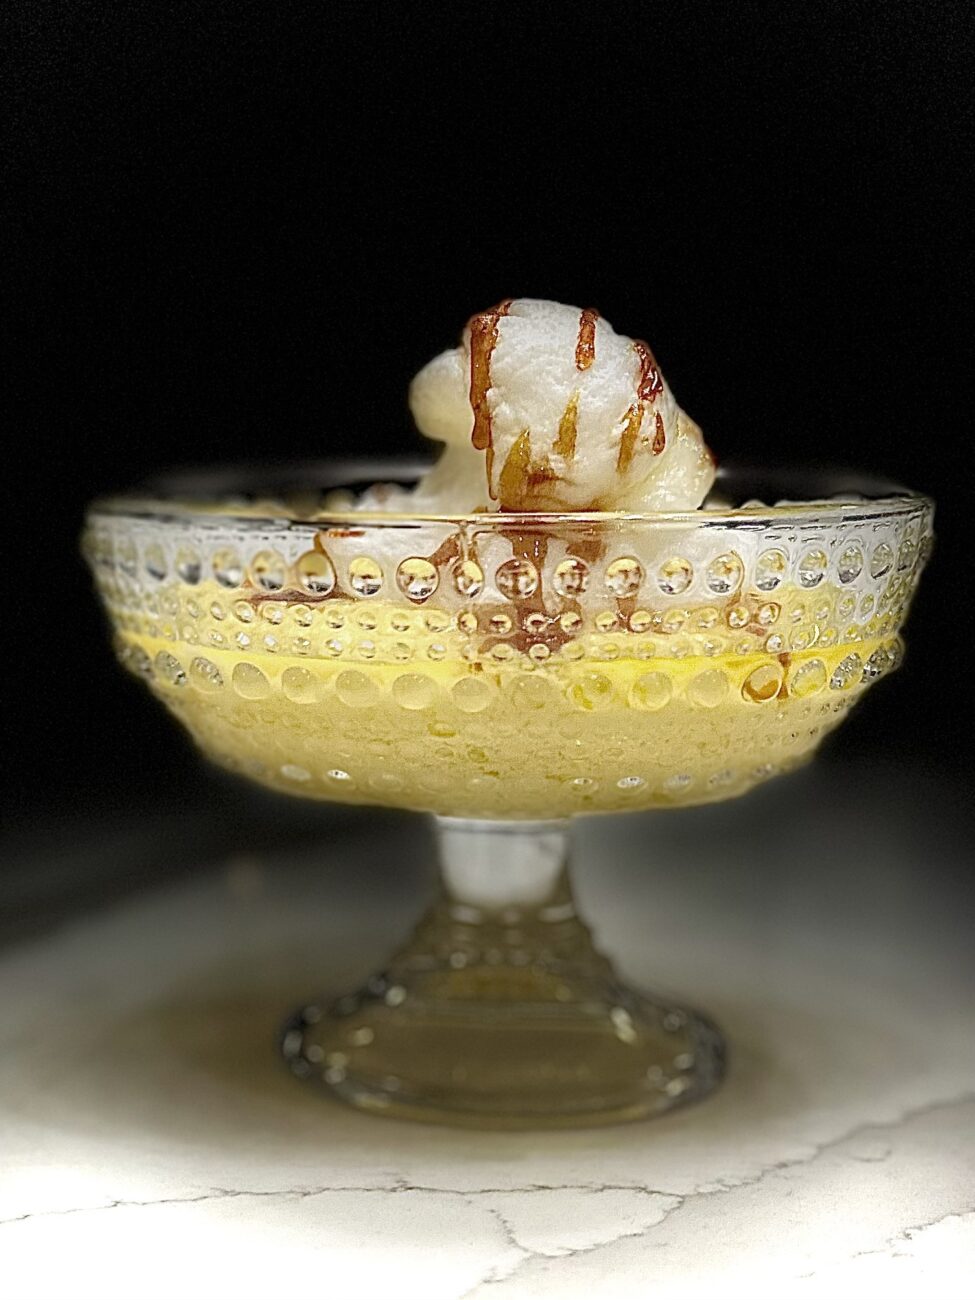 Île Flottante with Crème Anglaise and Caramel (Meringue floating in vanilla custard)